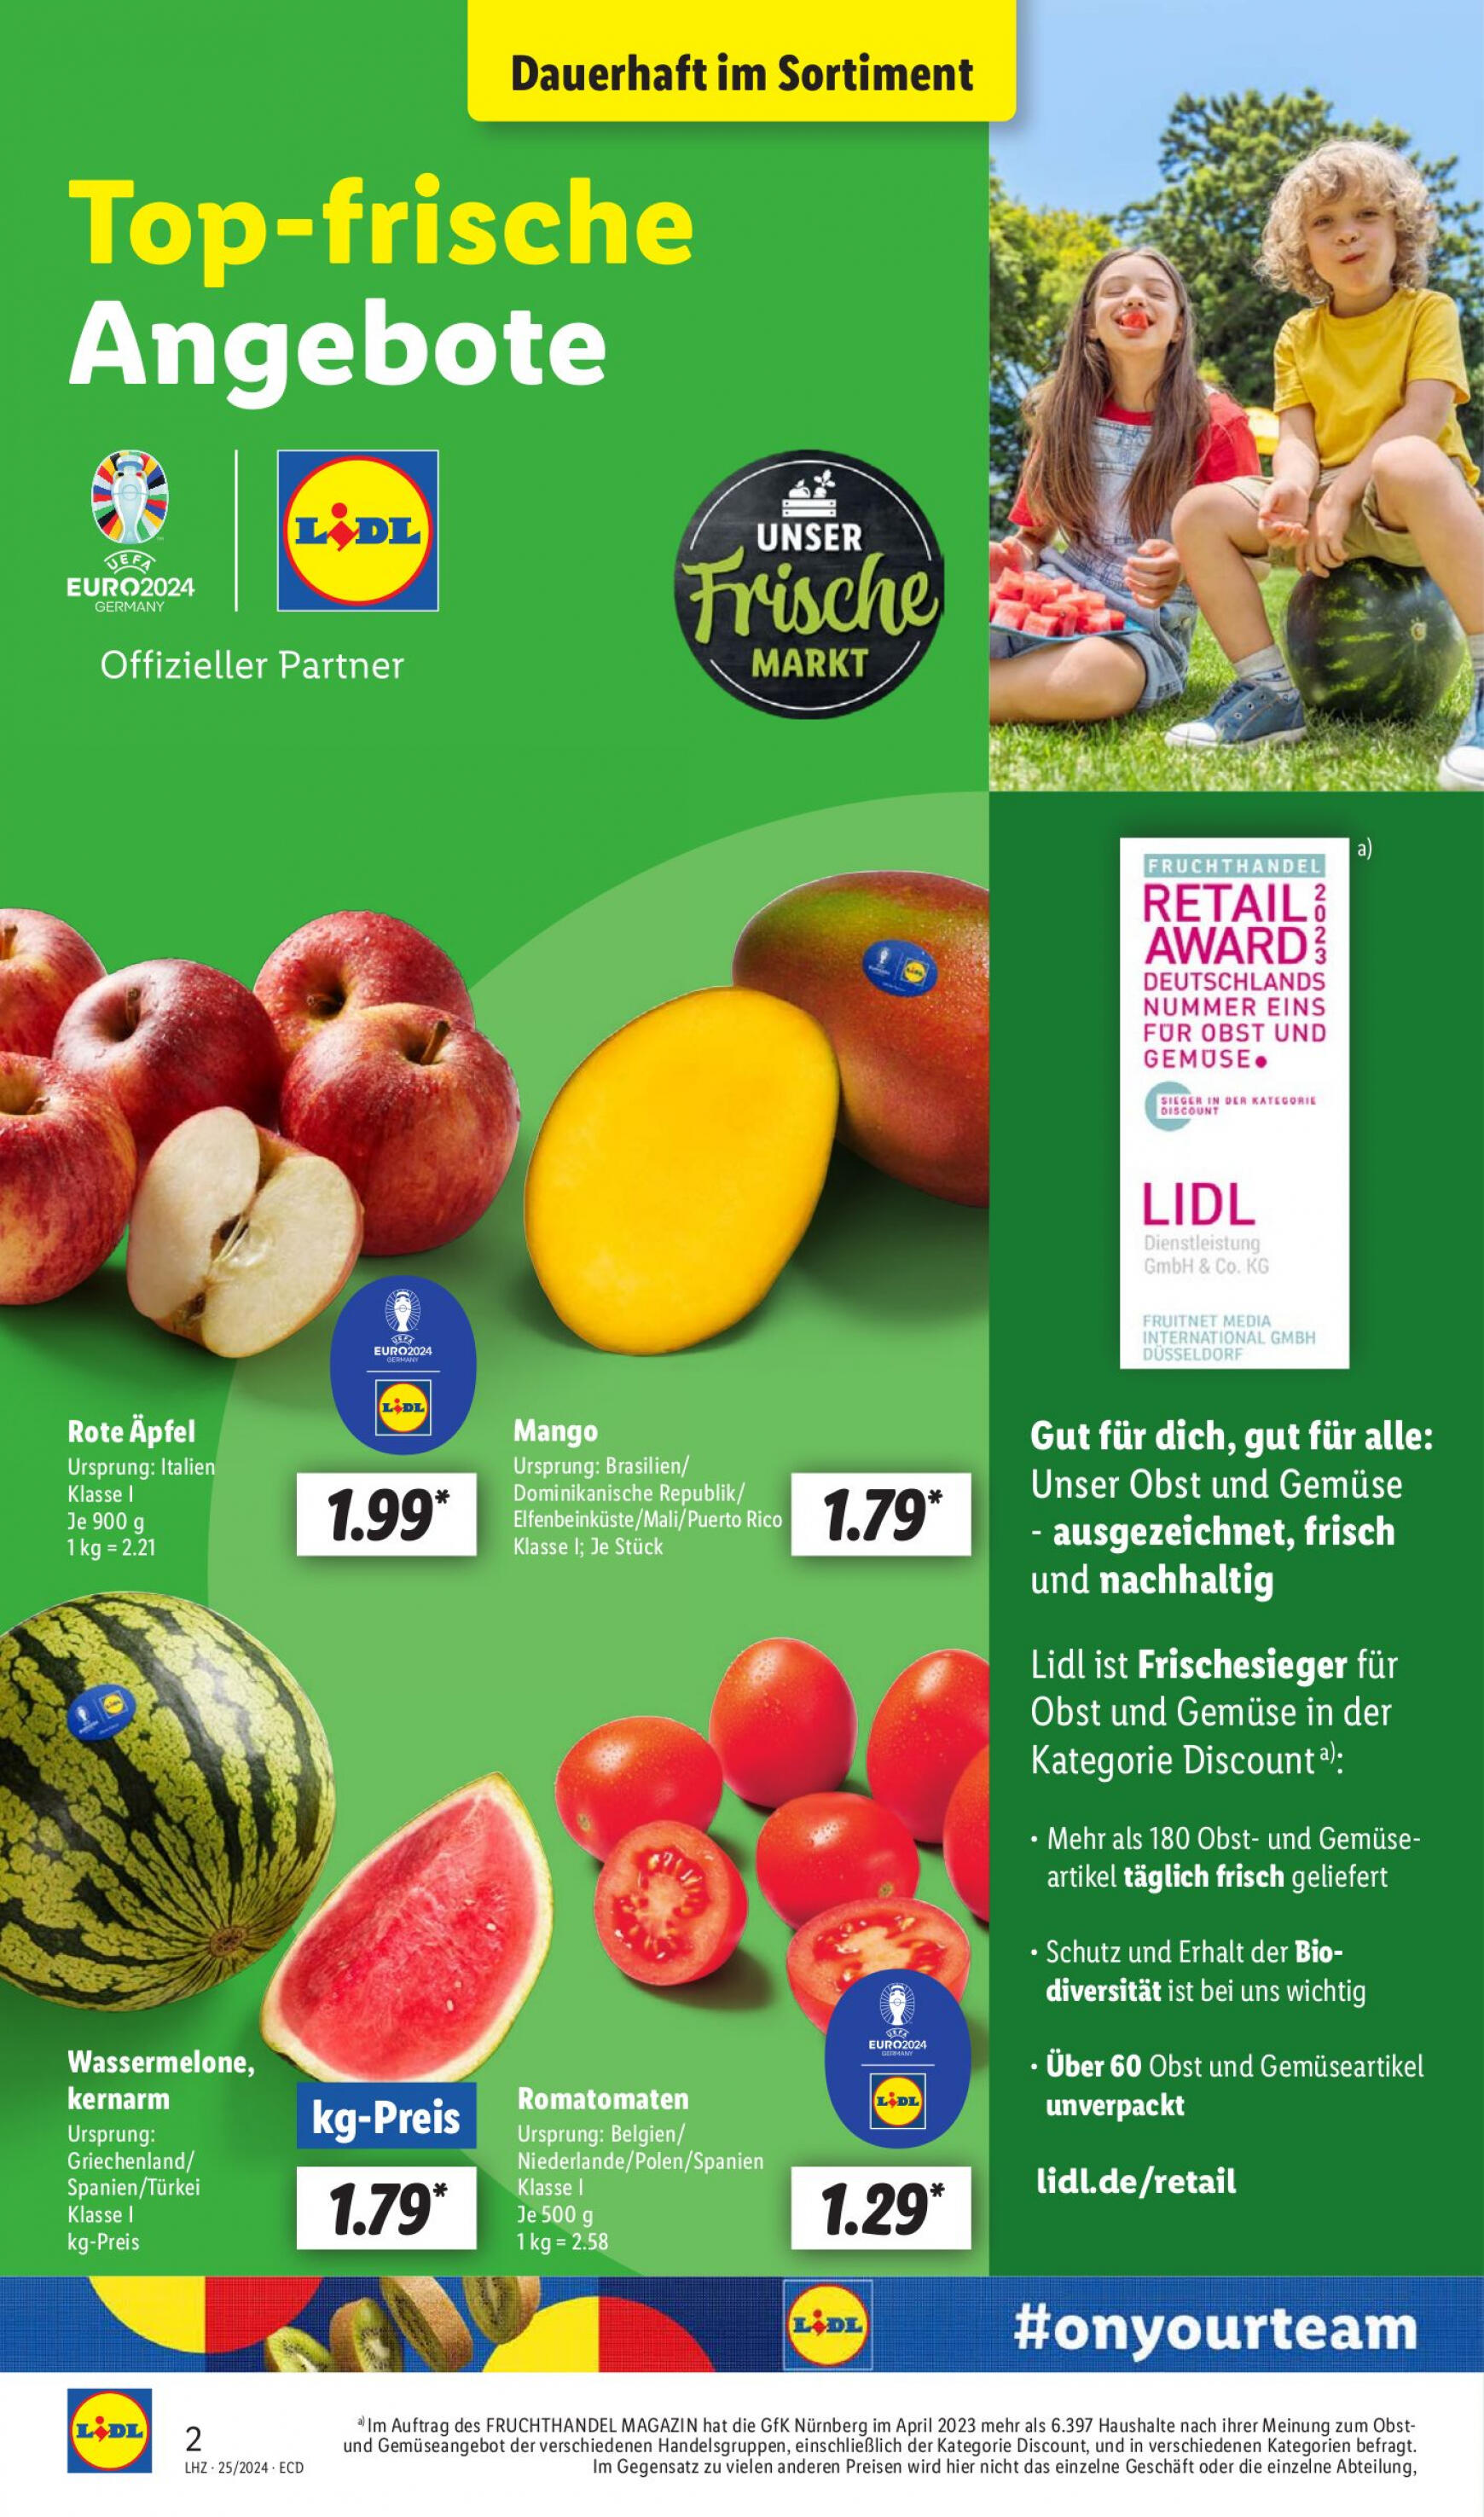 lidl - Flyer Lidl aktuell 17.06. - 22.06. - page: 2